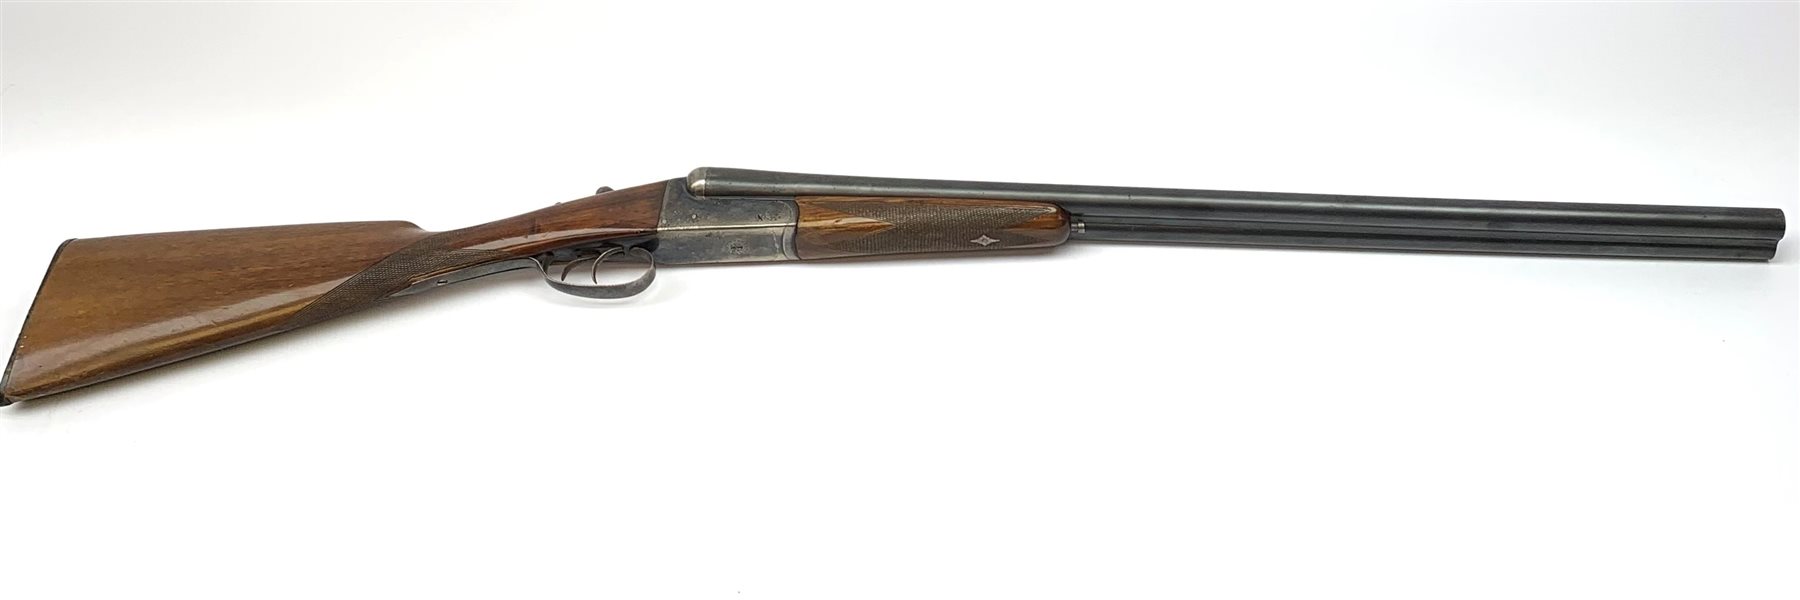 Spanish Zabala 12-bore box lock non-ejector side-by-side double barrel shotgun with walnut stock and - Image 2 of 5